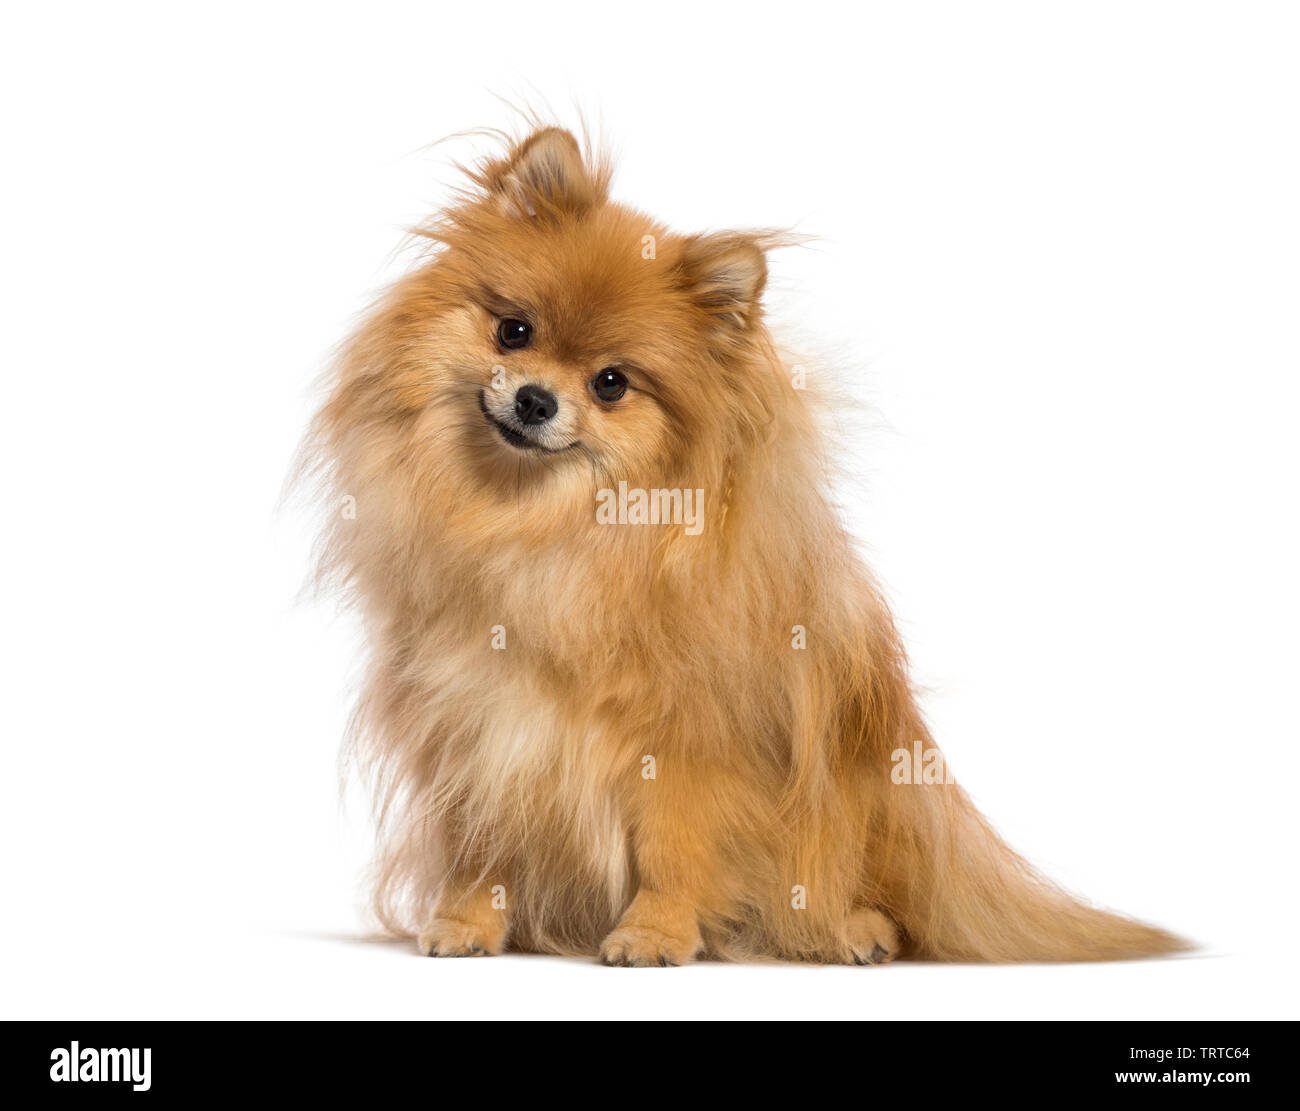 Japanese Spitz Sitting In Front Of White Background Stock Photo Alamy